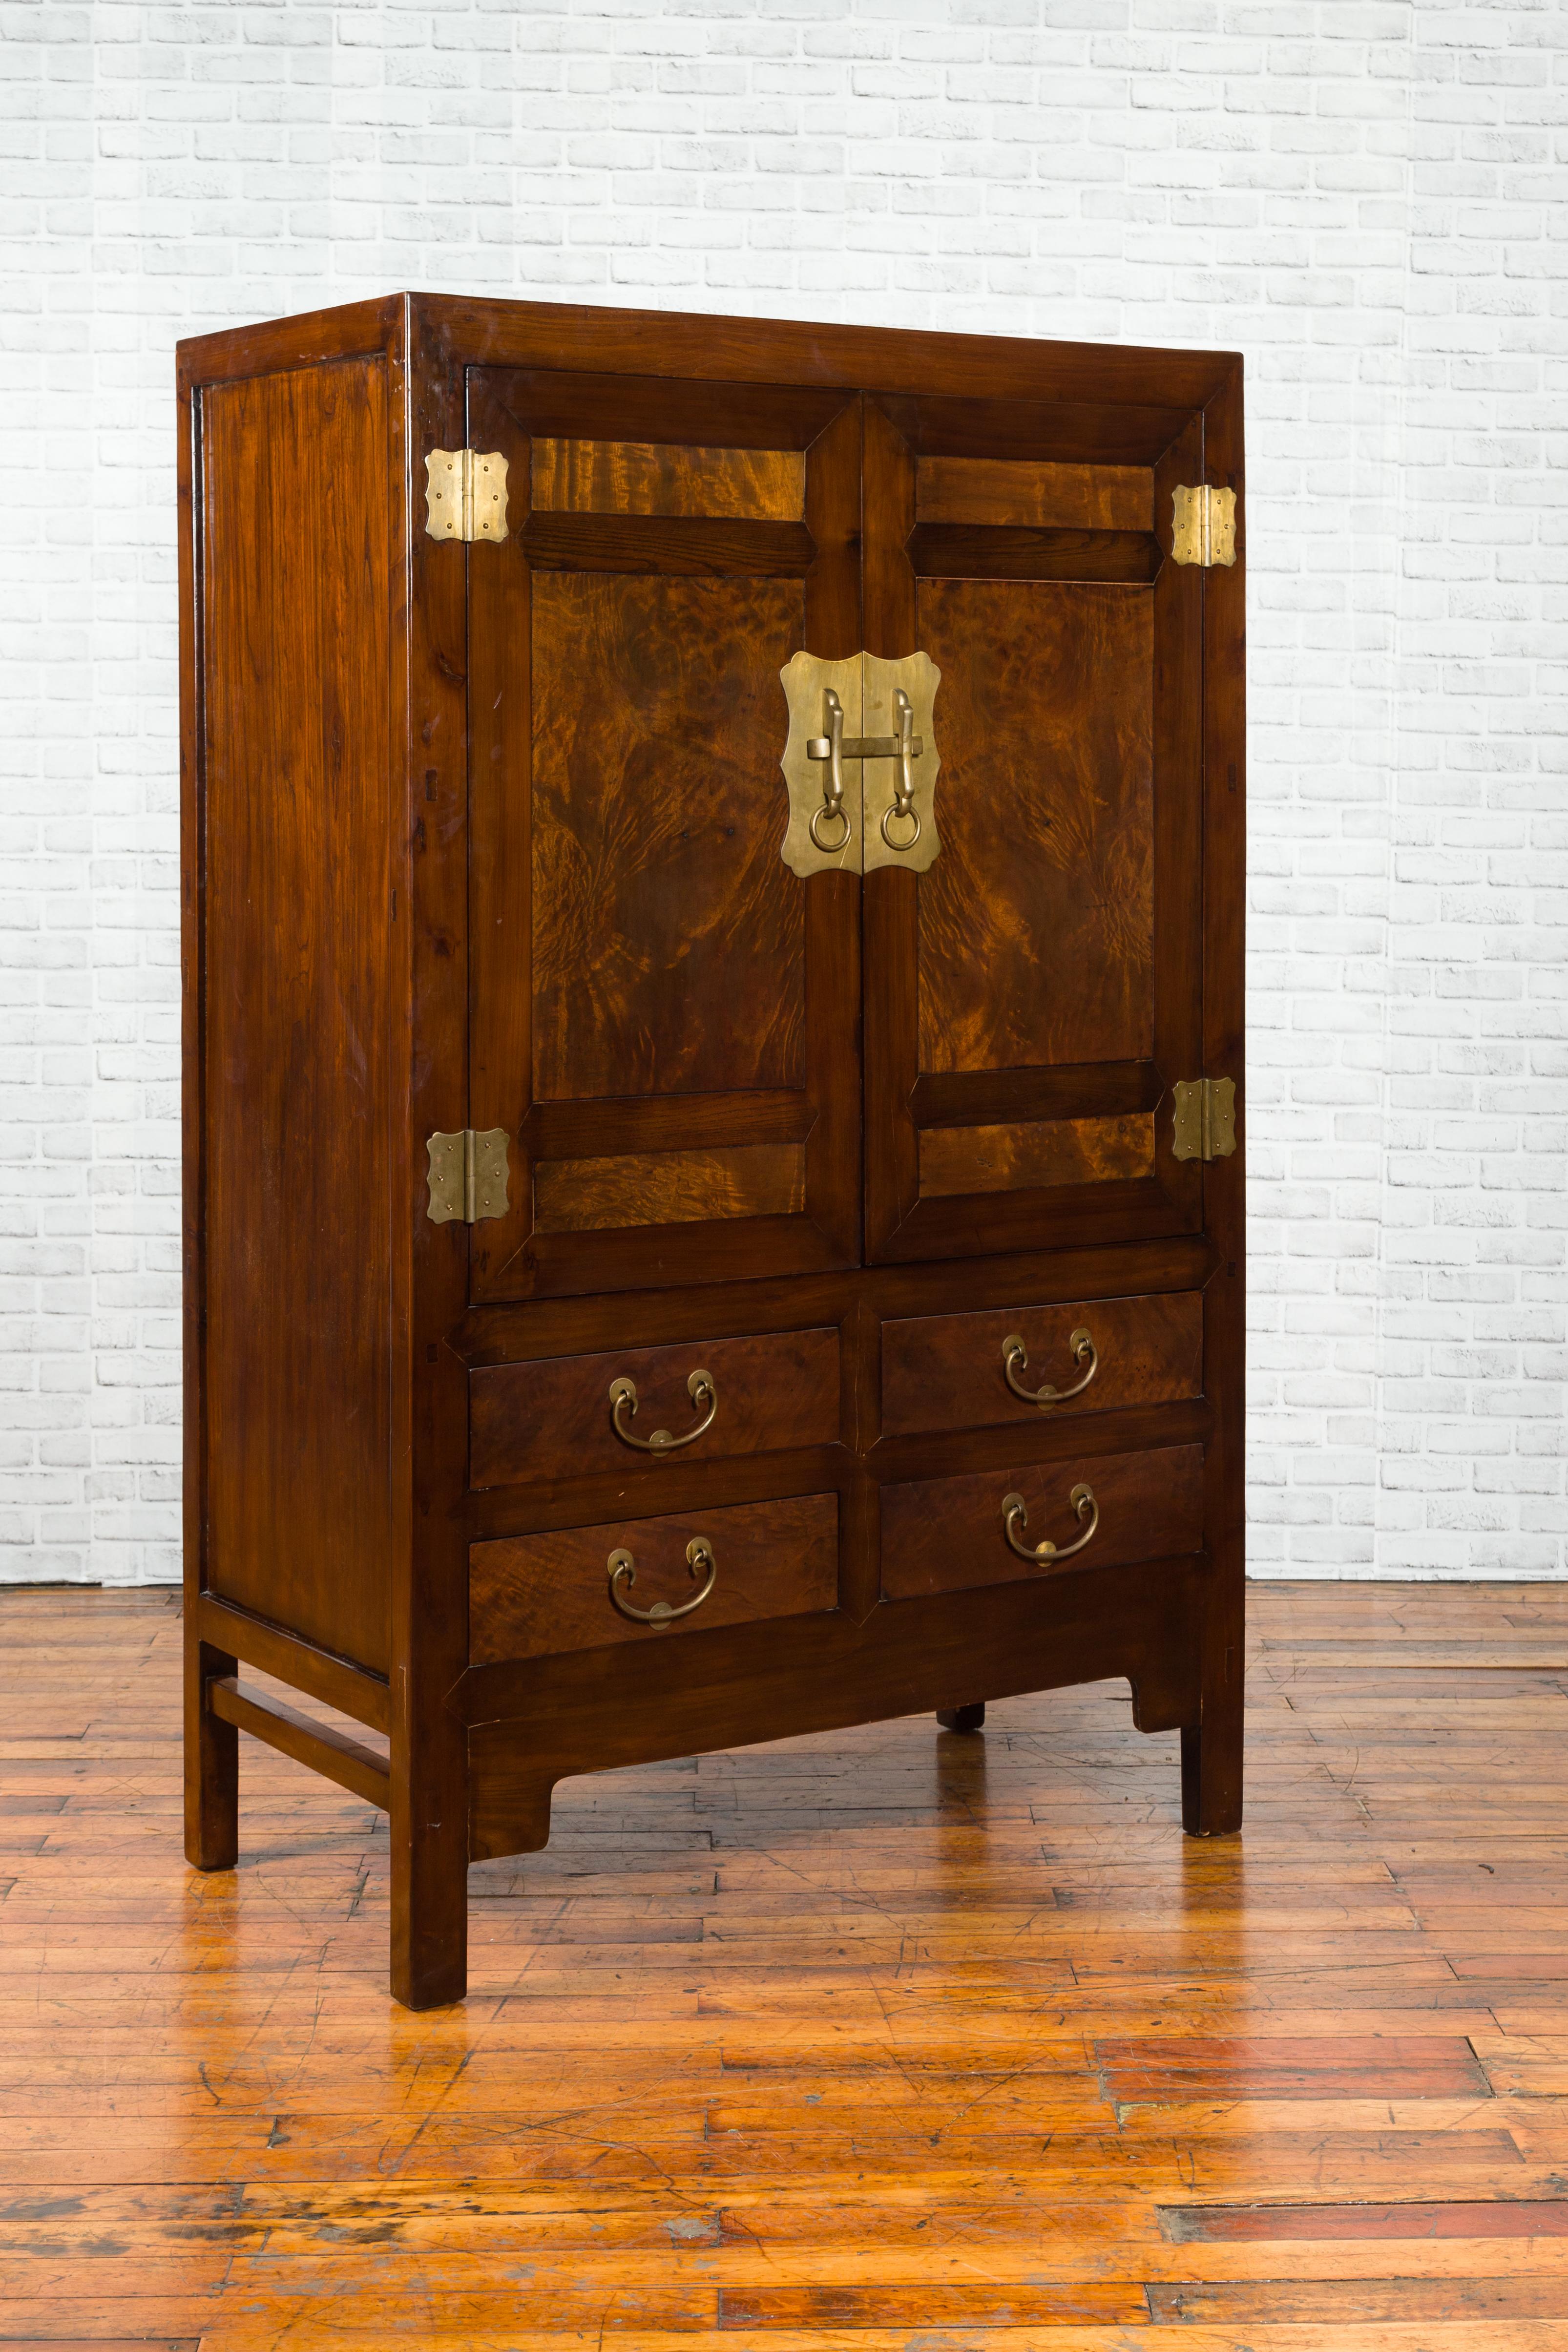 Chinese 1920s-1930s Elm and Burl Cabinet with Doors, Drawers and Brass Hardware For Sale 7